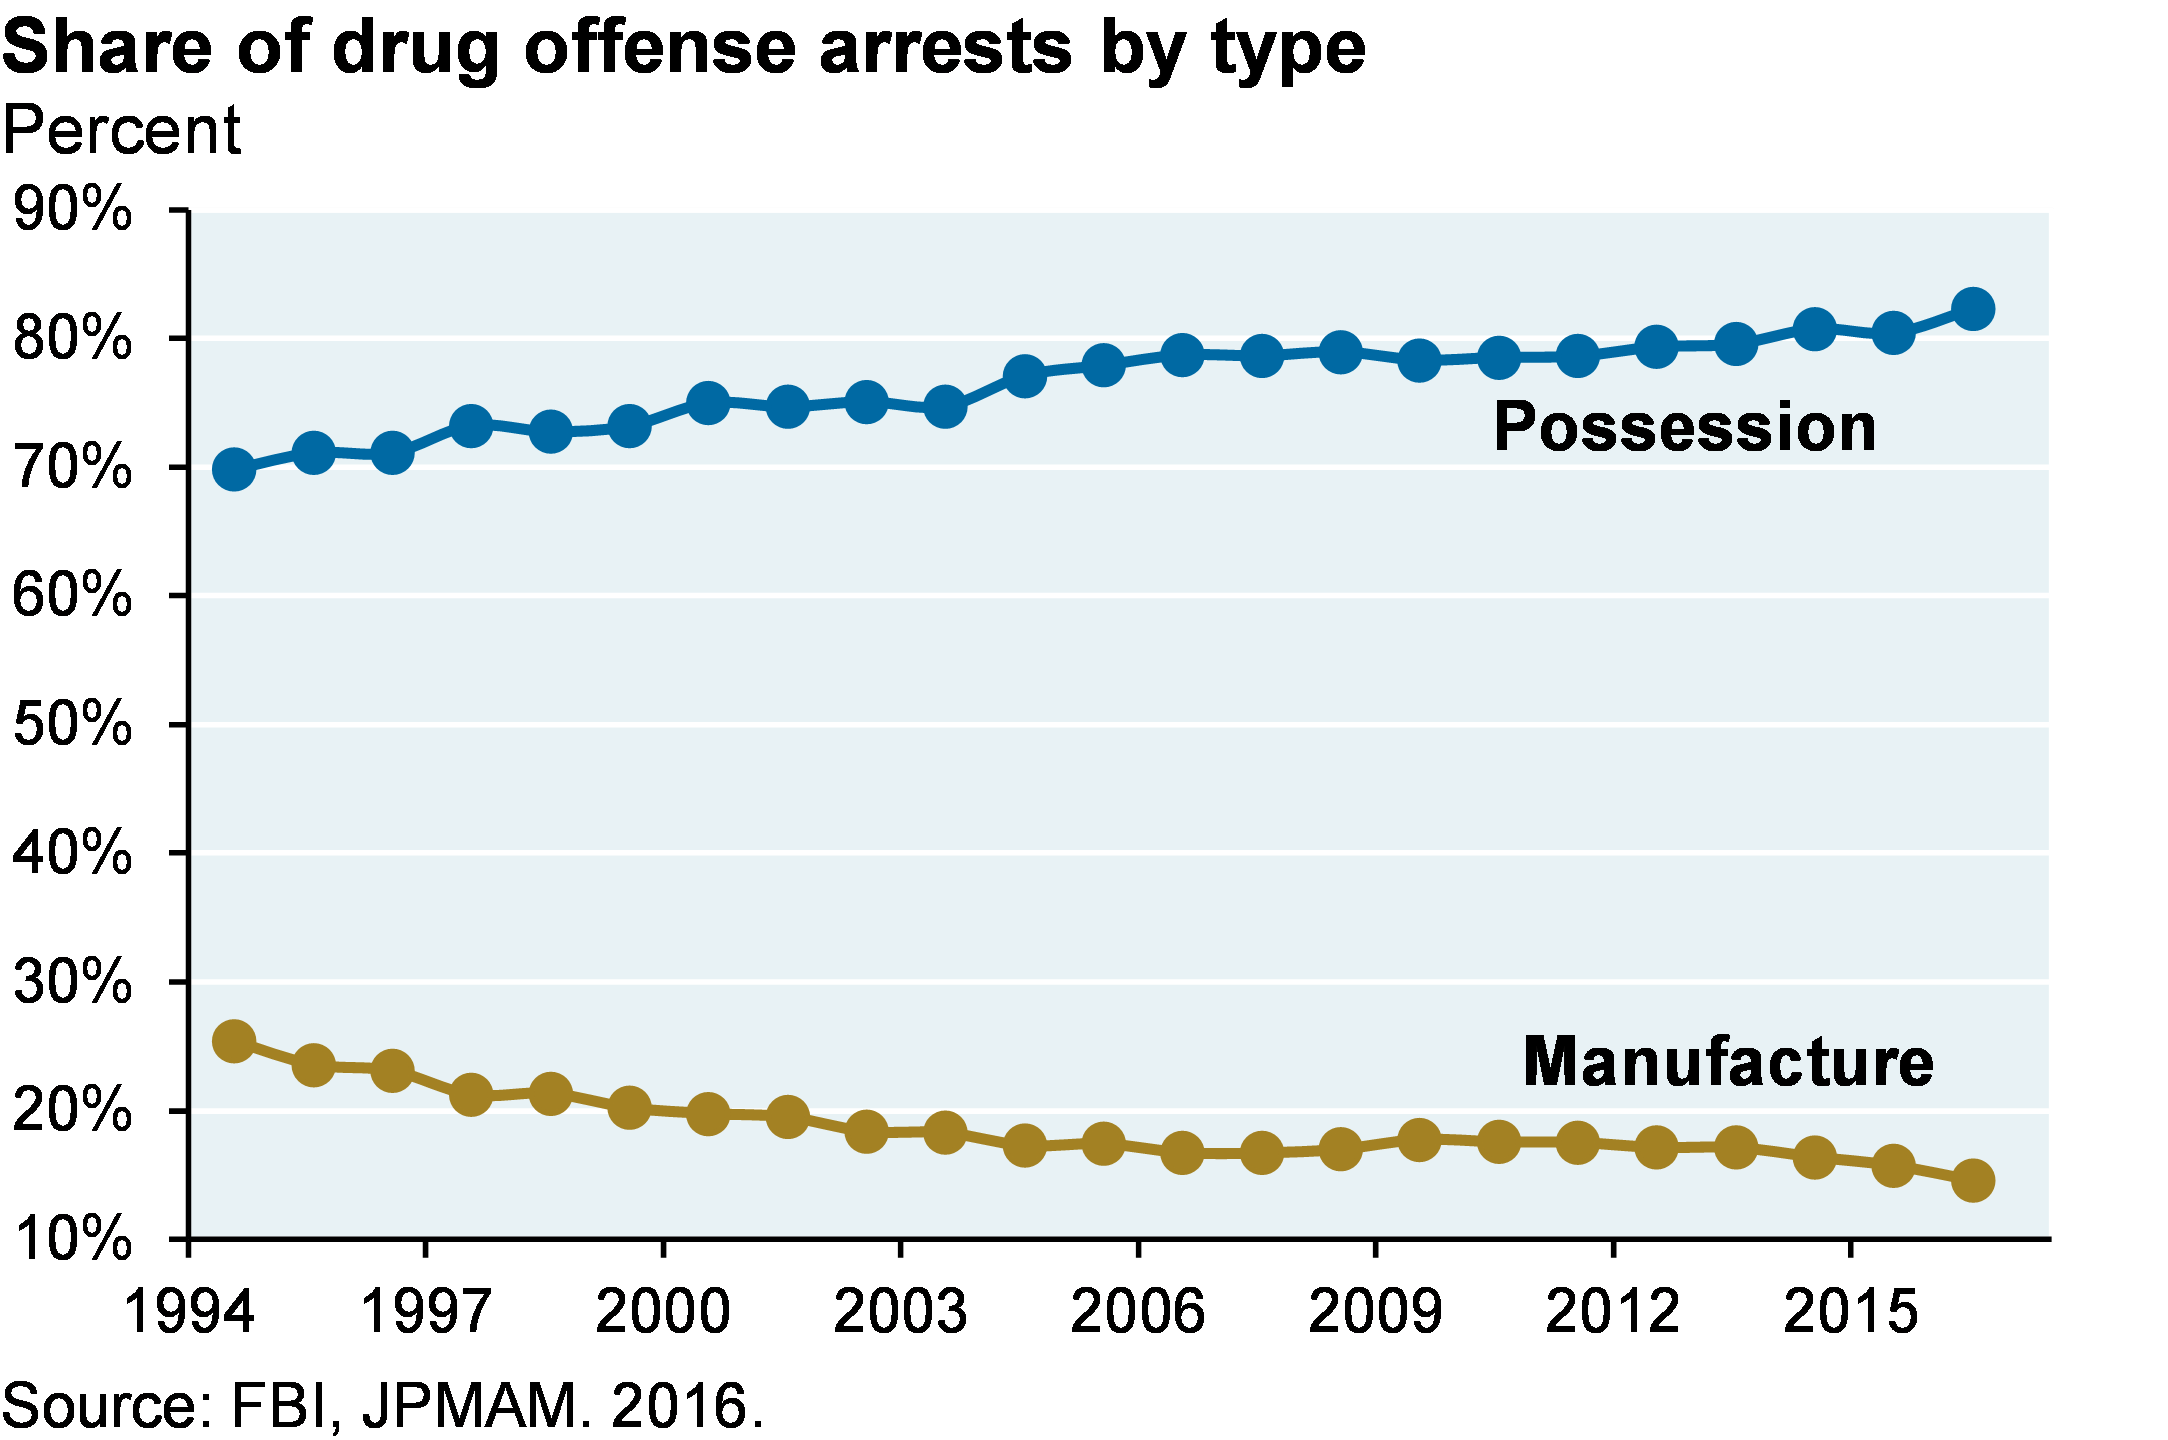 Line chart shows the share of drug offense arrests between possession and manufacture from 1994 to 2016. With respect to drug arrests, 70%-80% have been for possession rather than manufacture.